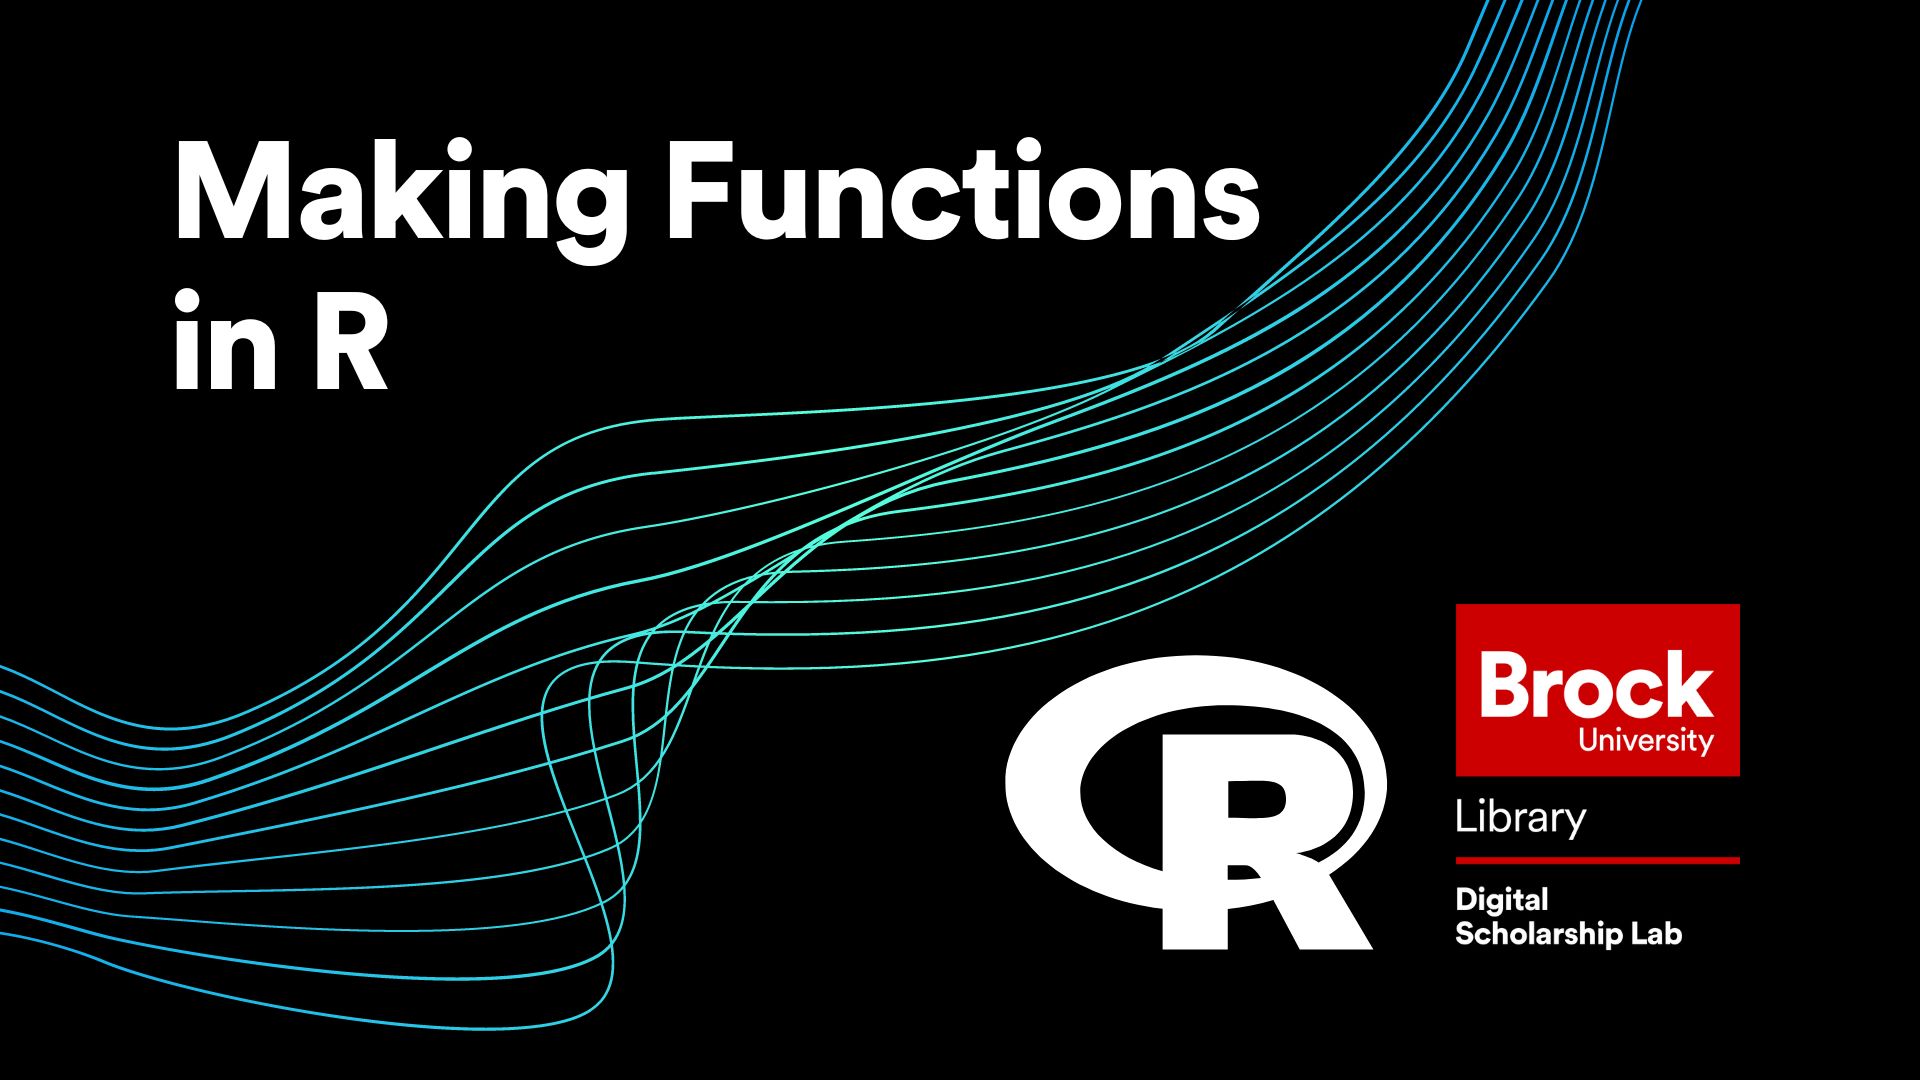 Making Functions with R